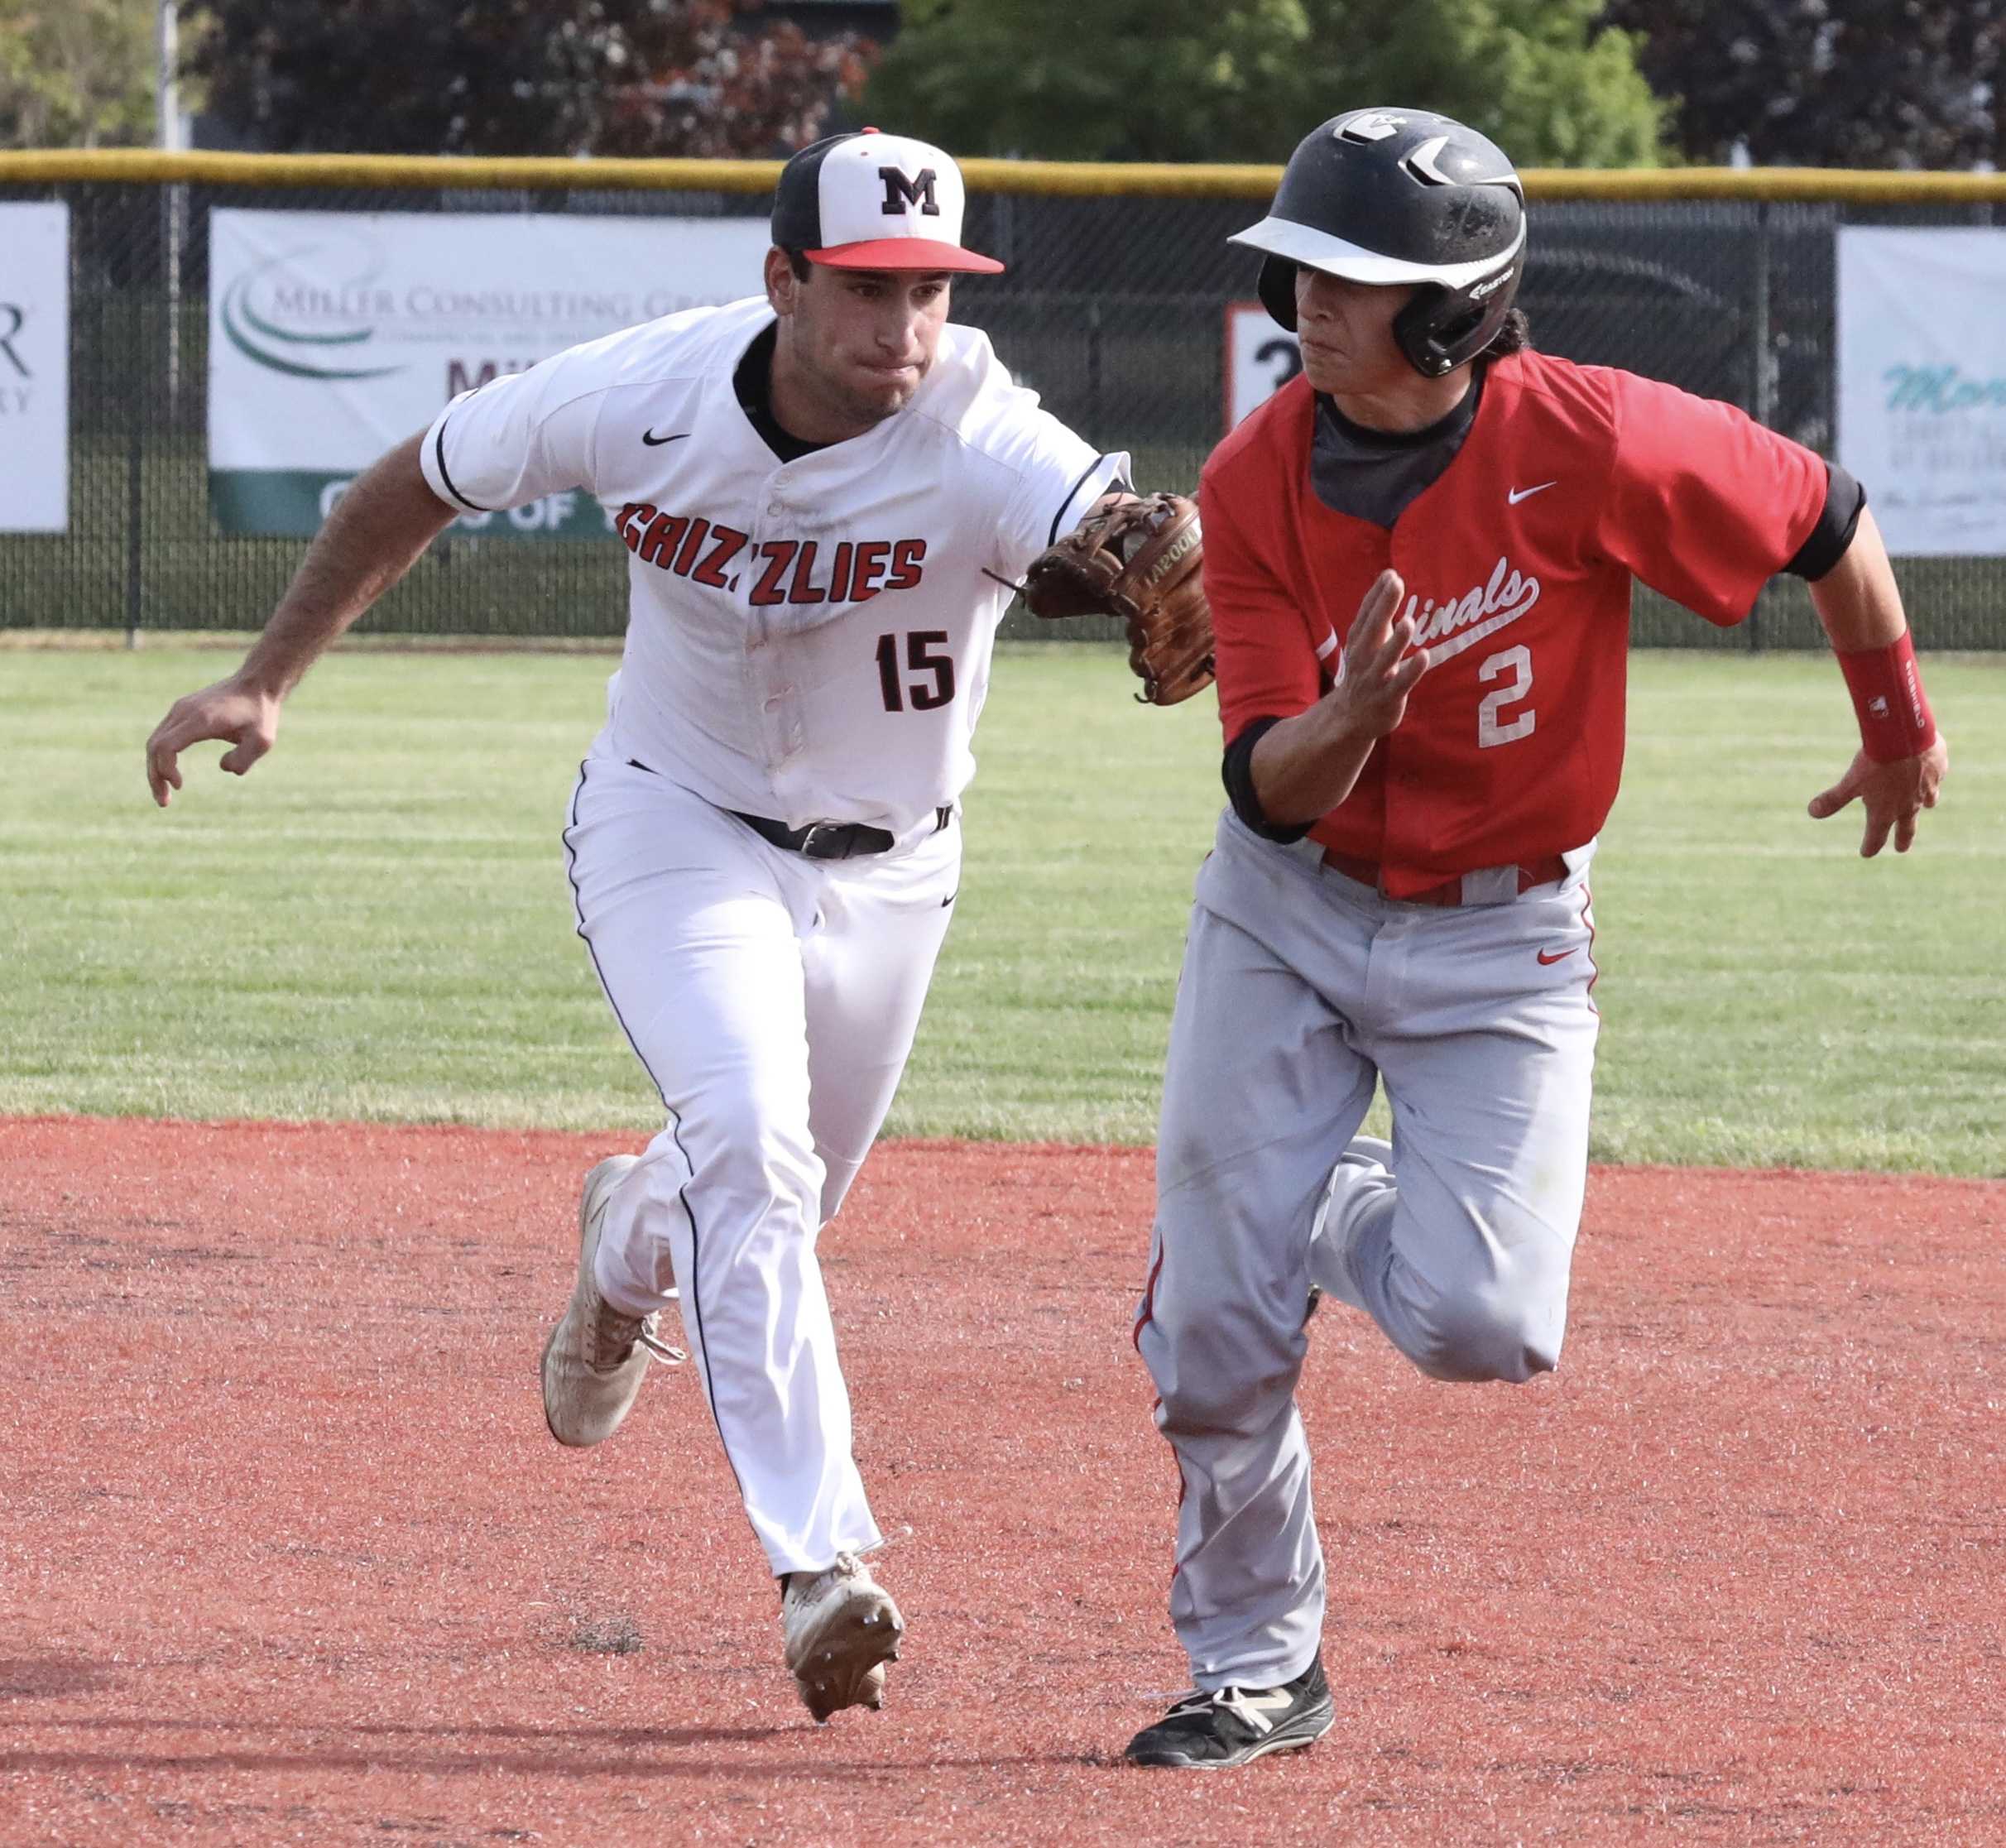 McMinnville second baseman Sam DuPuis tags out Lincoln's Kyle Gragnola on a successful pickoff play in the second inning.